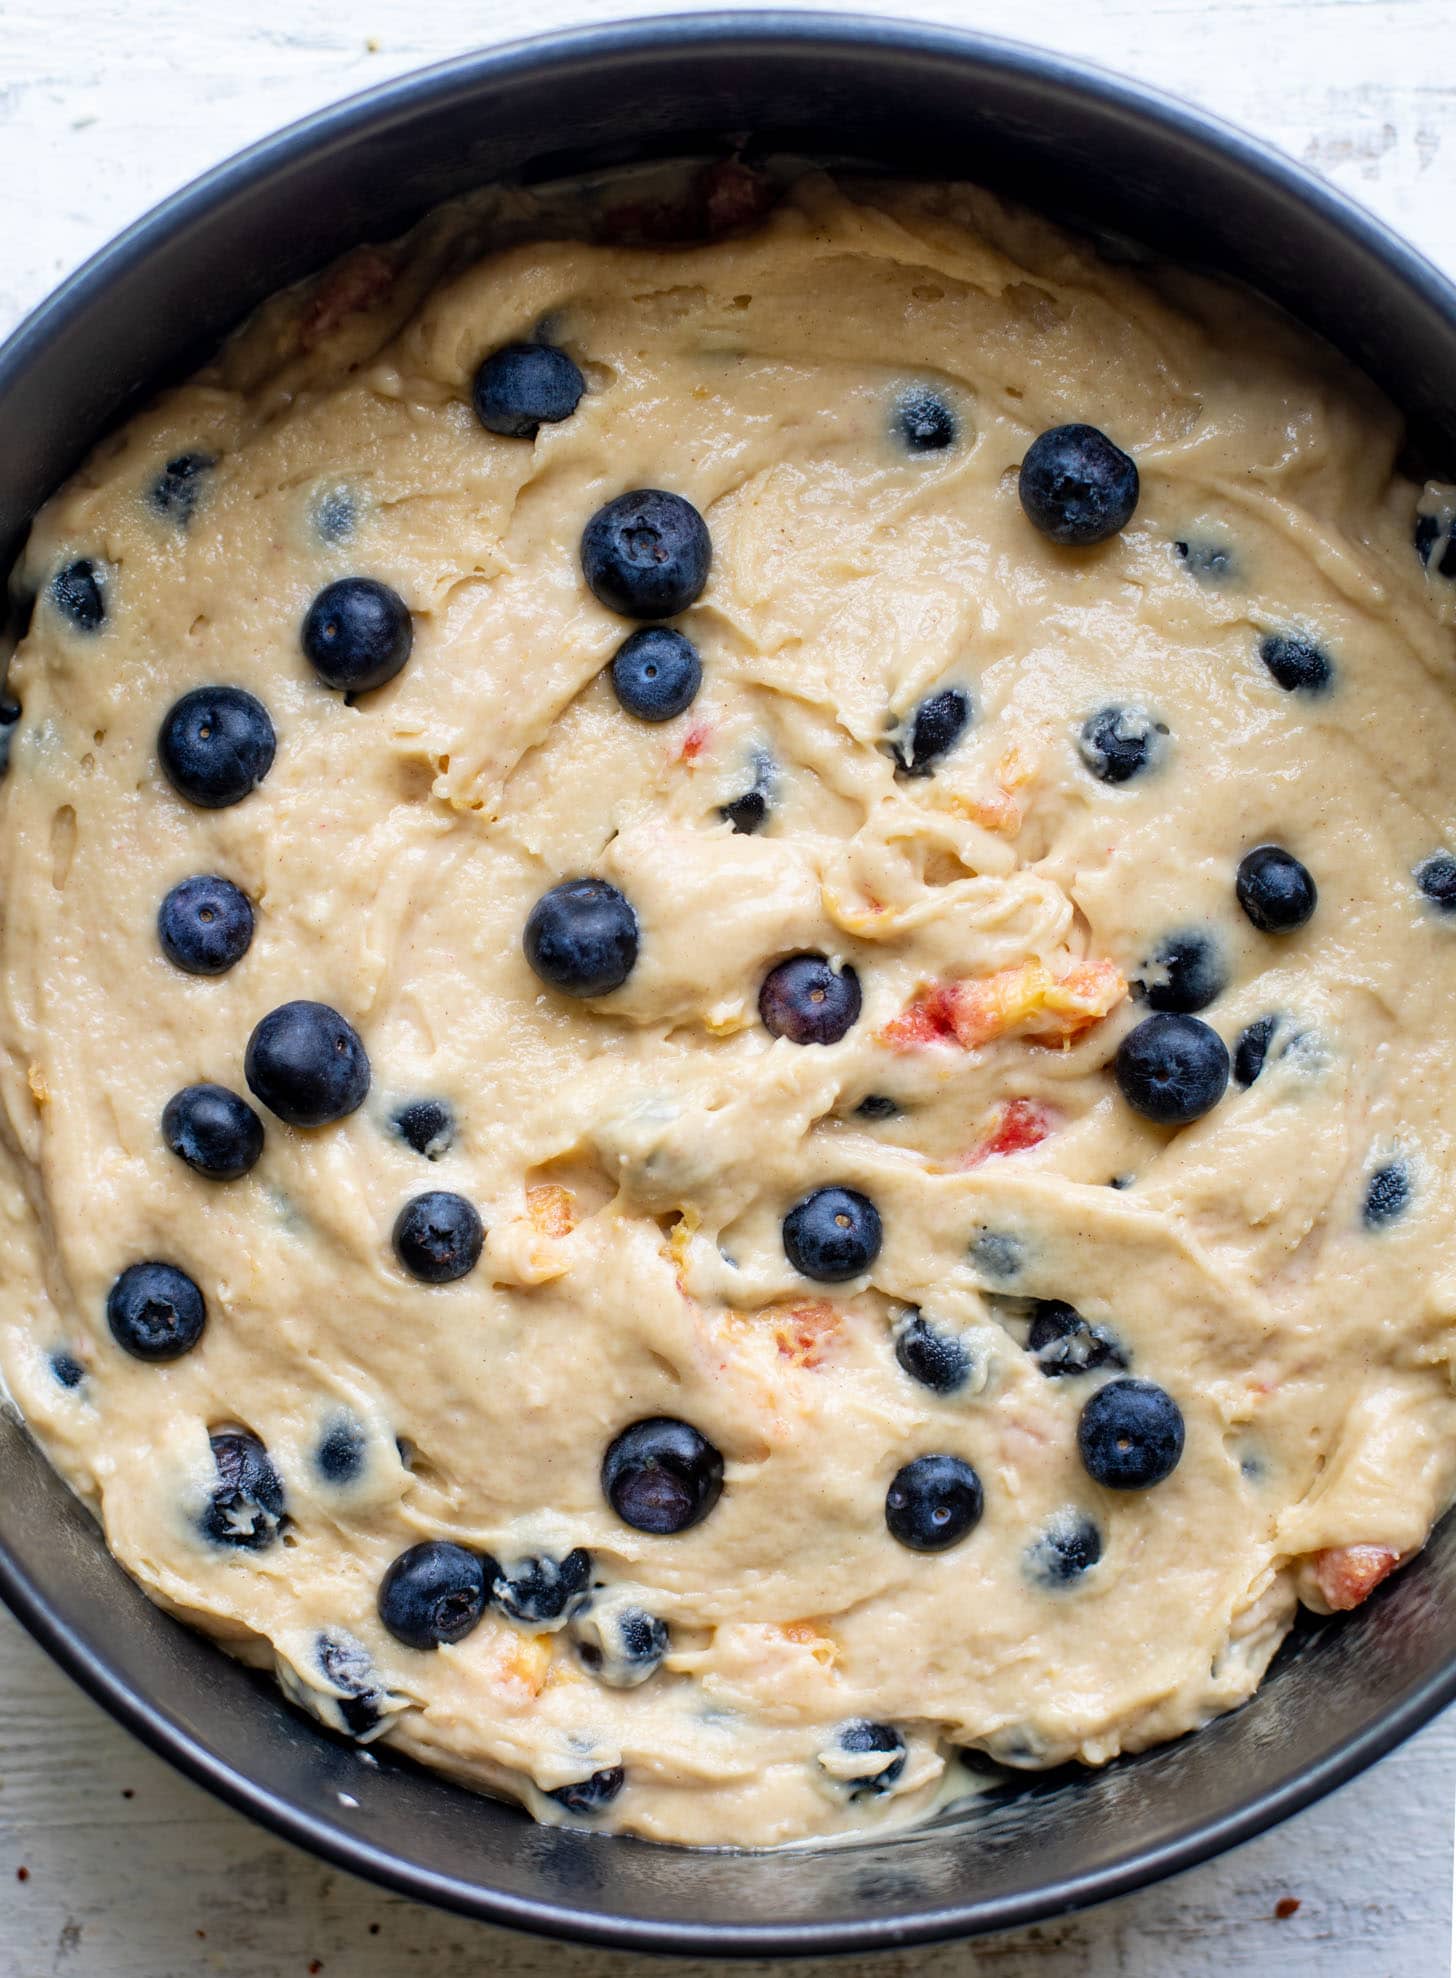 cake batter with blueberries and peaches